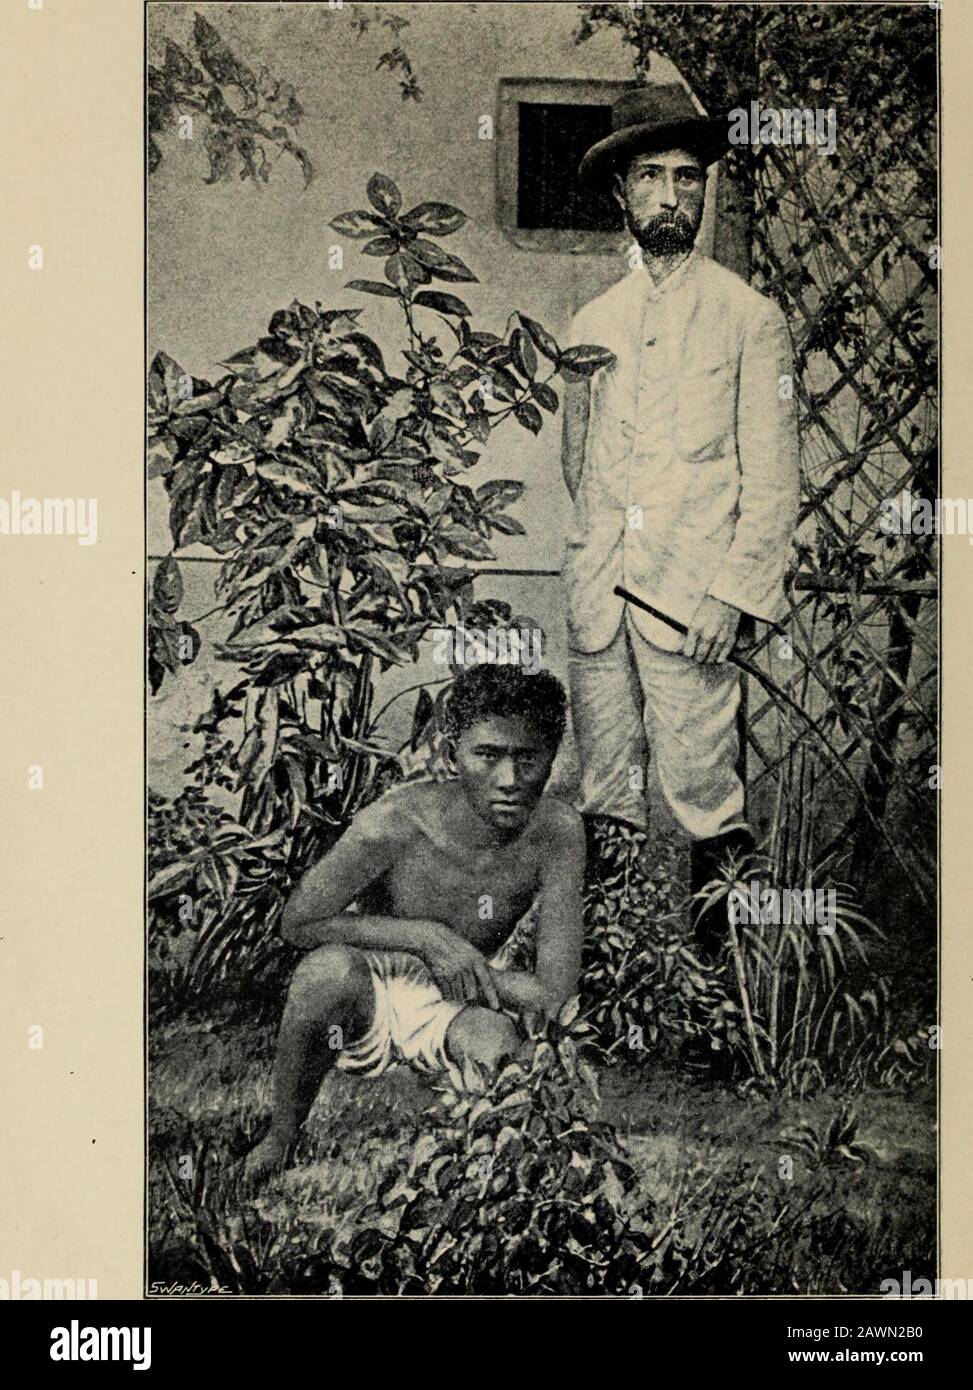 The Philippine IslandsA political, Geographical, ethnographical, social and commercial history of the Philippine Archipelago and its political dependencies, embracing the whole period of Spanish rule . THE AUTHOR AND HIS TRAVELLING SERVANT. THE PHILIPPINE ISLANDS A Political, Geographical, Ethnographical, Social and CommercialHistory of the Philippine Archipelago ITS POLITICAL DEPENDENCIES,Embracing the whole Period of Spanish Rule. BY JOHN FOREMAN, F.R.G.S. SECOND EDITION, REVISED AND ENLARGED, WITH MAPS AiYD JLLVSTBATIONS. NEW YORK:CHARLES SCRIBNEE^   SONS. 1899. SEEN BYPRESERVATIONSERVICES Stock Photo